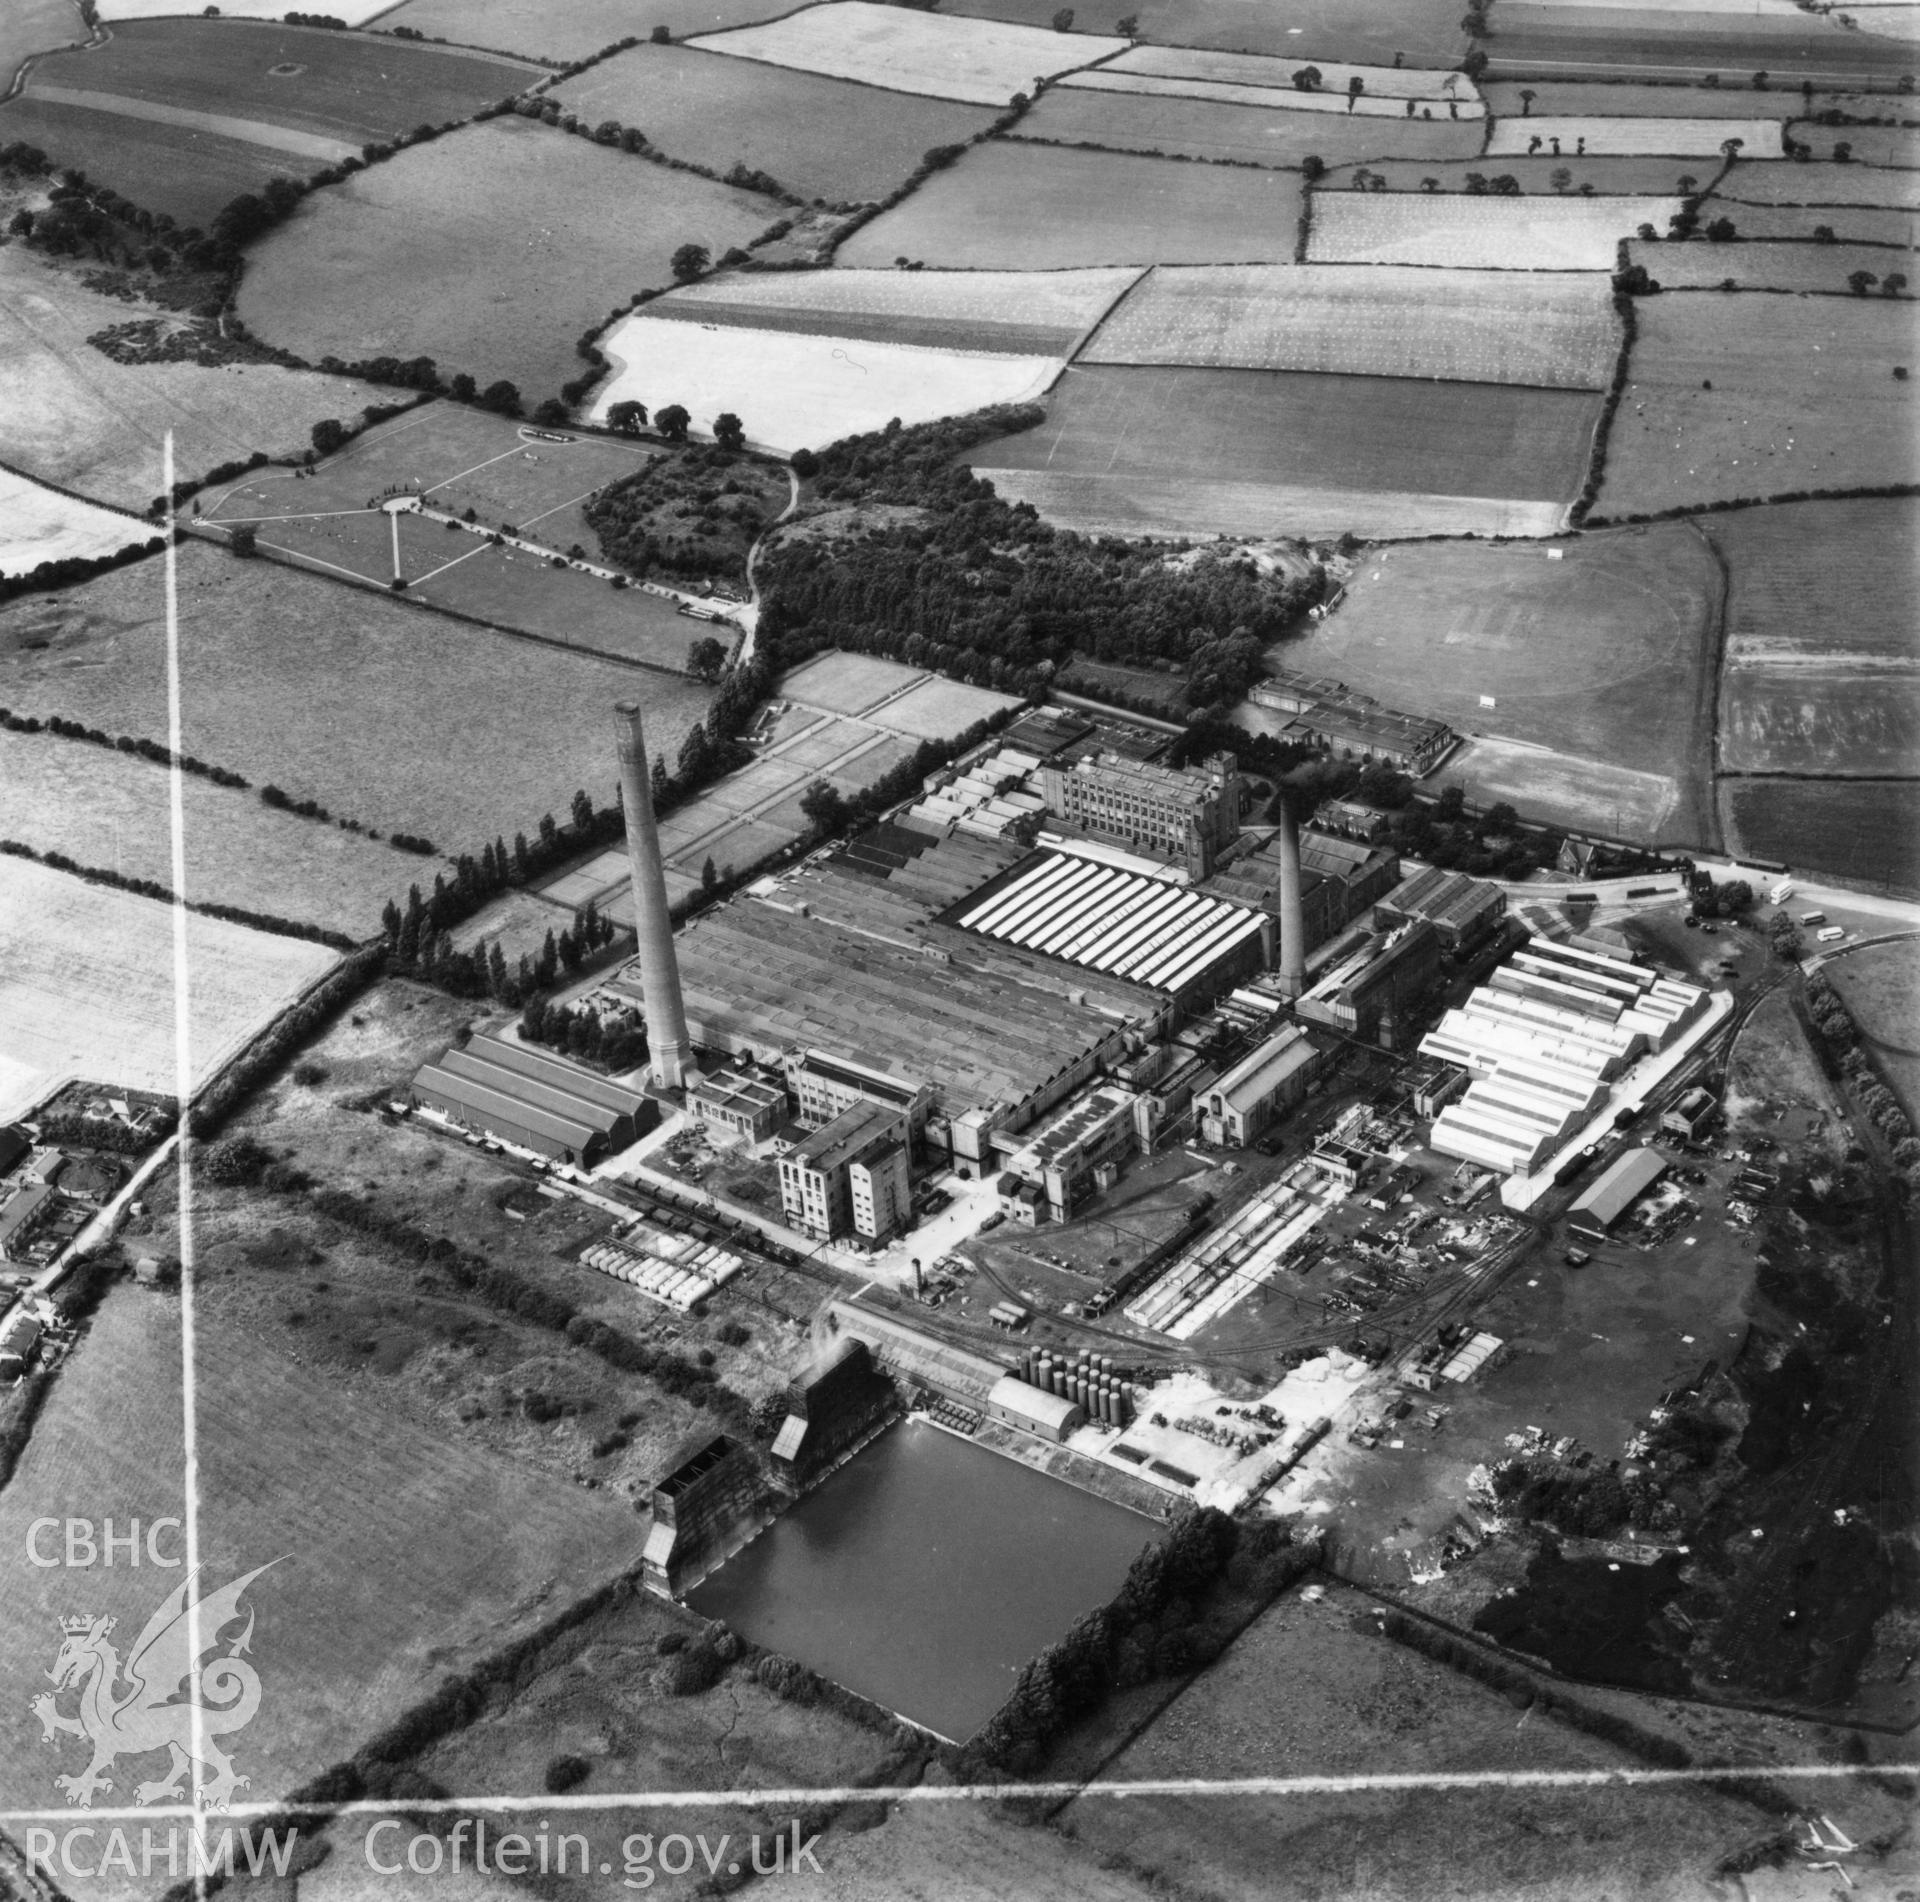 View of the Courtauld's Aber works at Flint. Oblique aerial photograph, 5?" cut roll film.